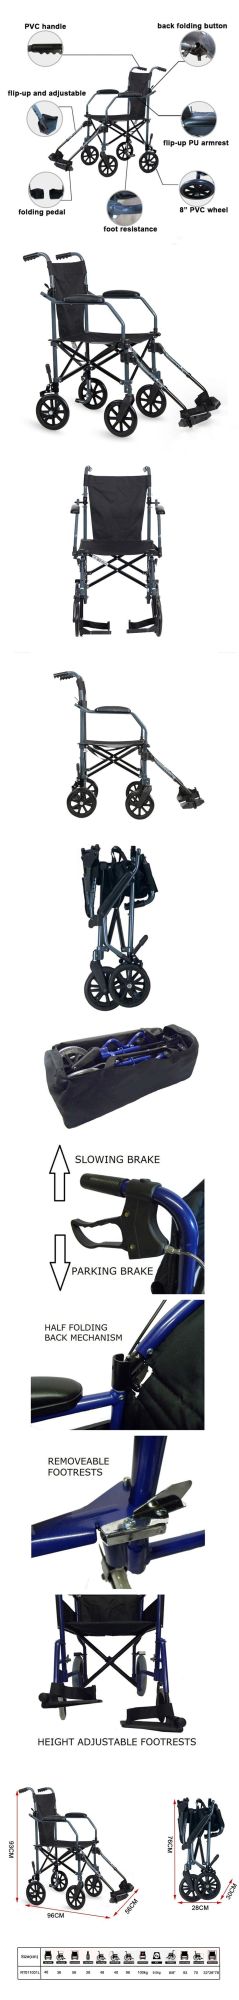 8" Wheels Lightweight Portable Transport Folding Wheelchair for Disabled